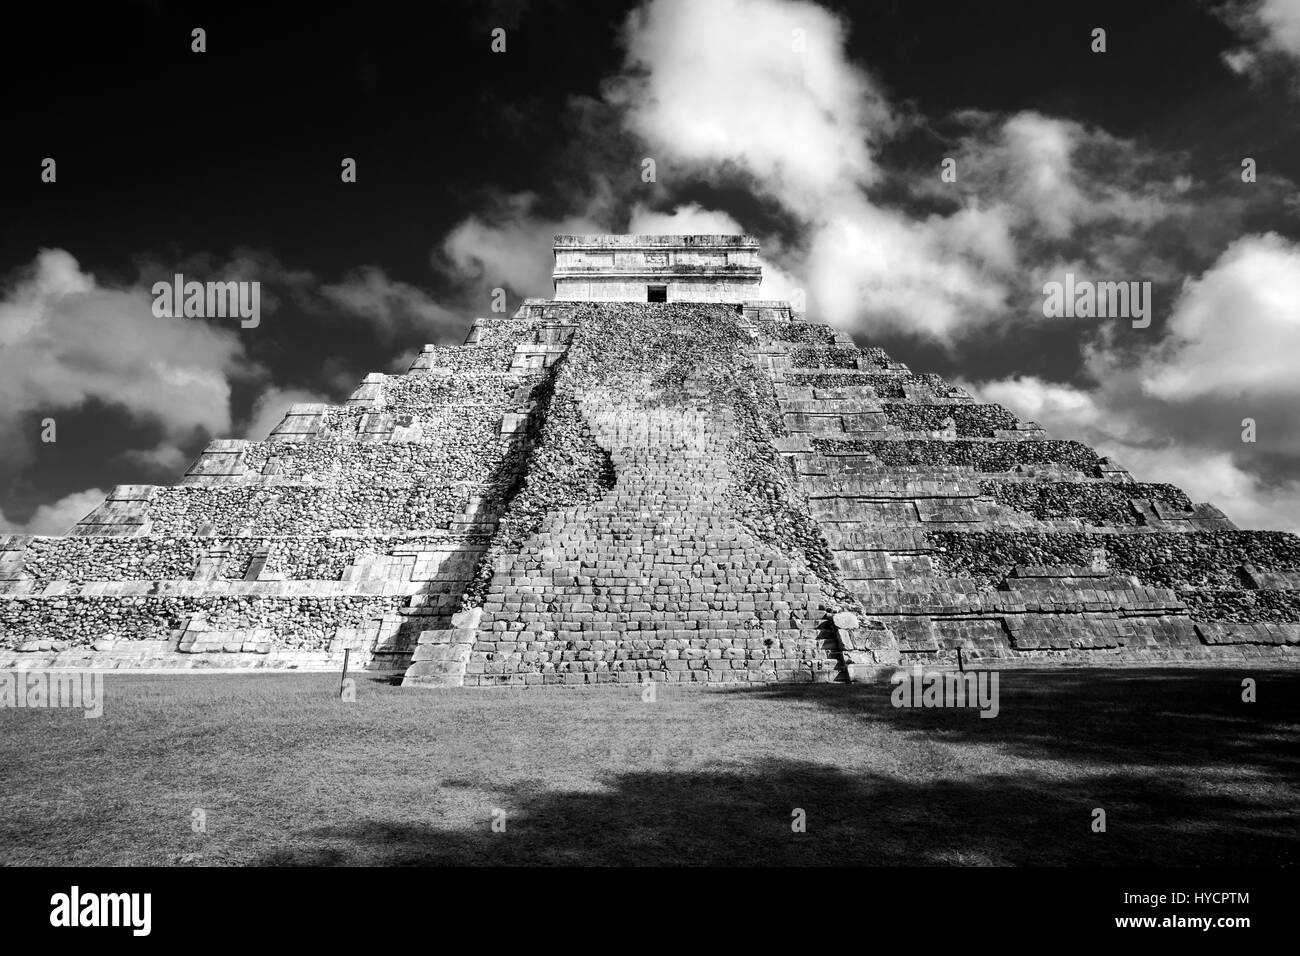 Famous Mayan pyramid in Chichen Itza archeological site, one of new Seven wonders of the World, Mexico Stock Photo